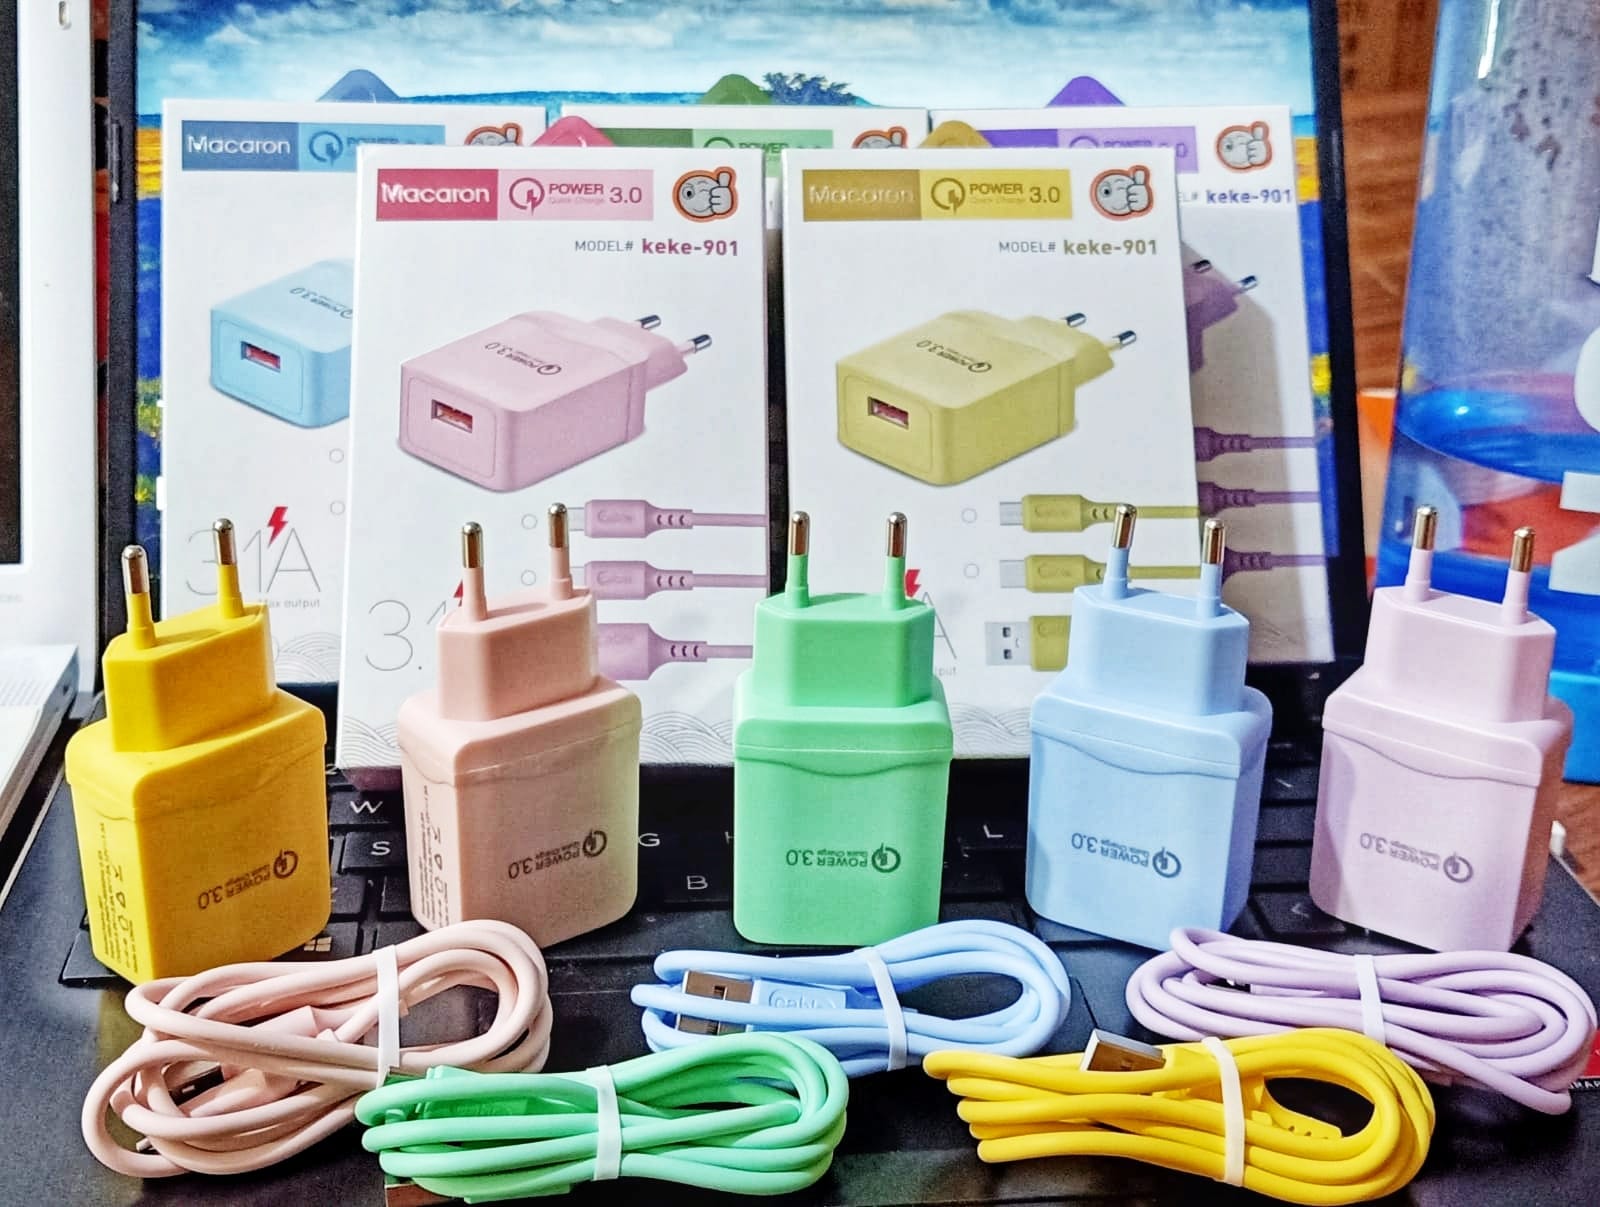 TRAVEL CHARGER  MACARON 1.5A 901 